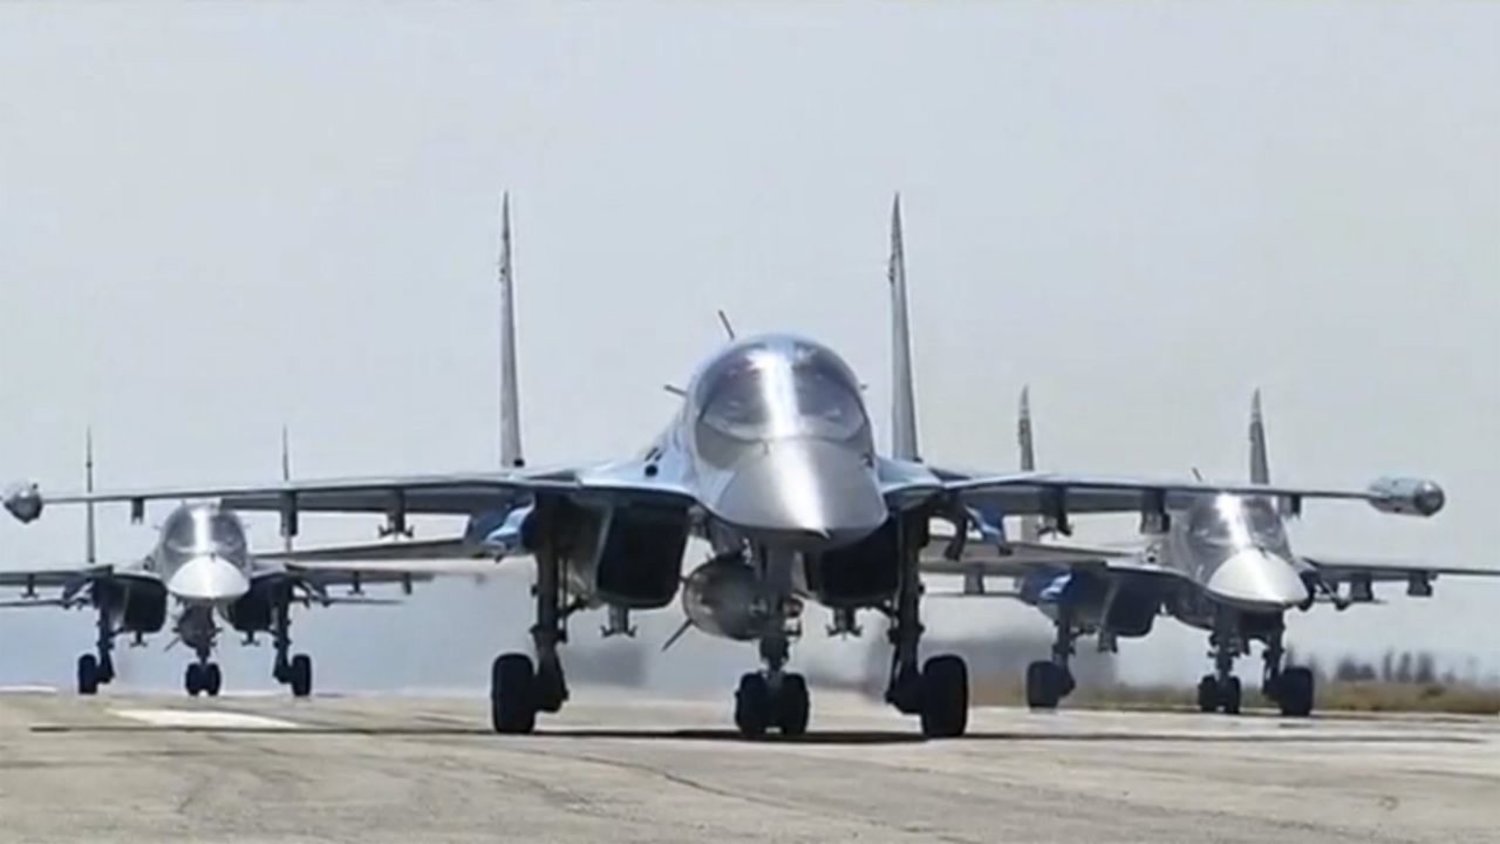 Russian military jets take off from the country's air base in Hmeimin, Syria in this still image taken from video March 15, 2016. REUTERS/Russian Ministry of Defense